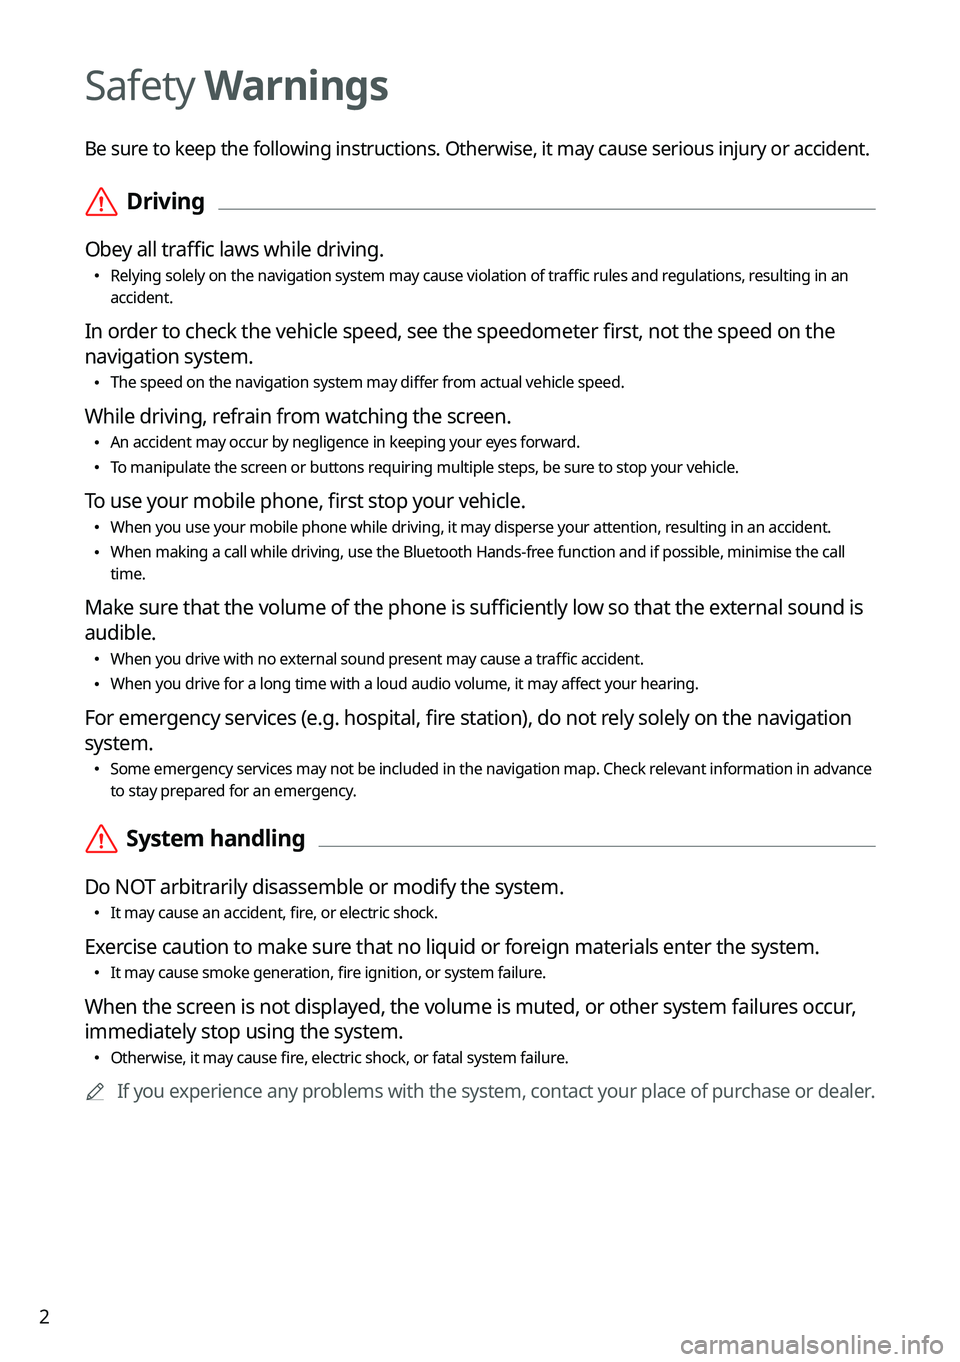 KIA SELTOS 2022  Navigation System Quick Reference Guide 2
Safety Warnings
Be sure to keep the following instructions. Otherwise, it may cause serious injury or accident.
 \335Driving
Obey all traffic laws while driving.
 \225
Relying solely on the navigati